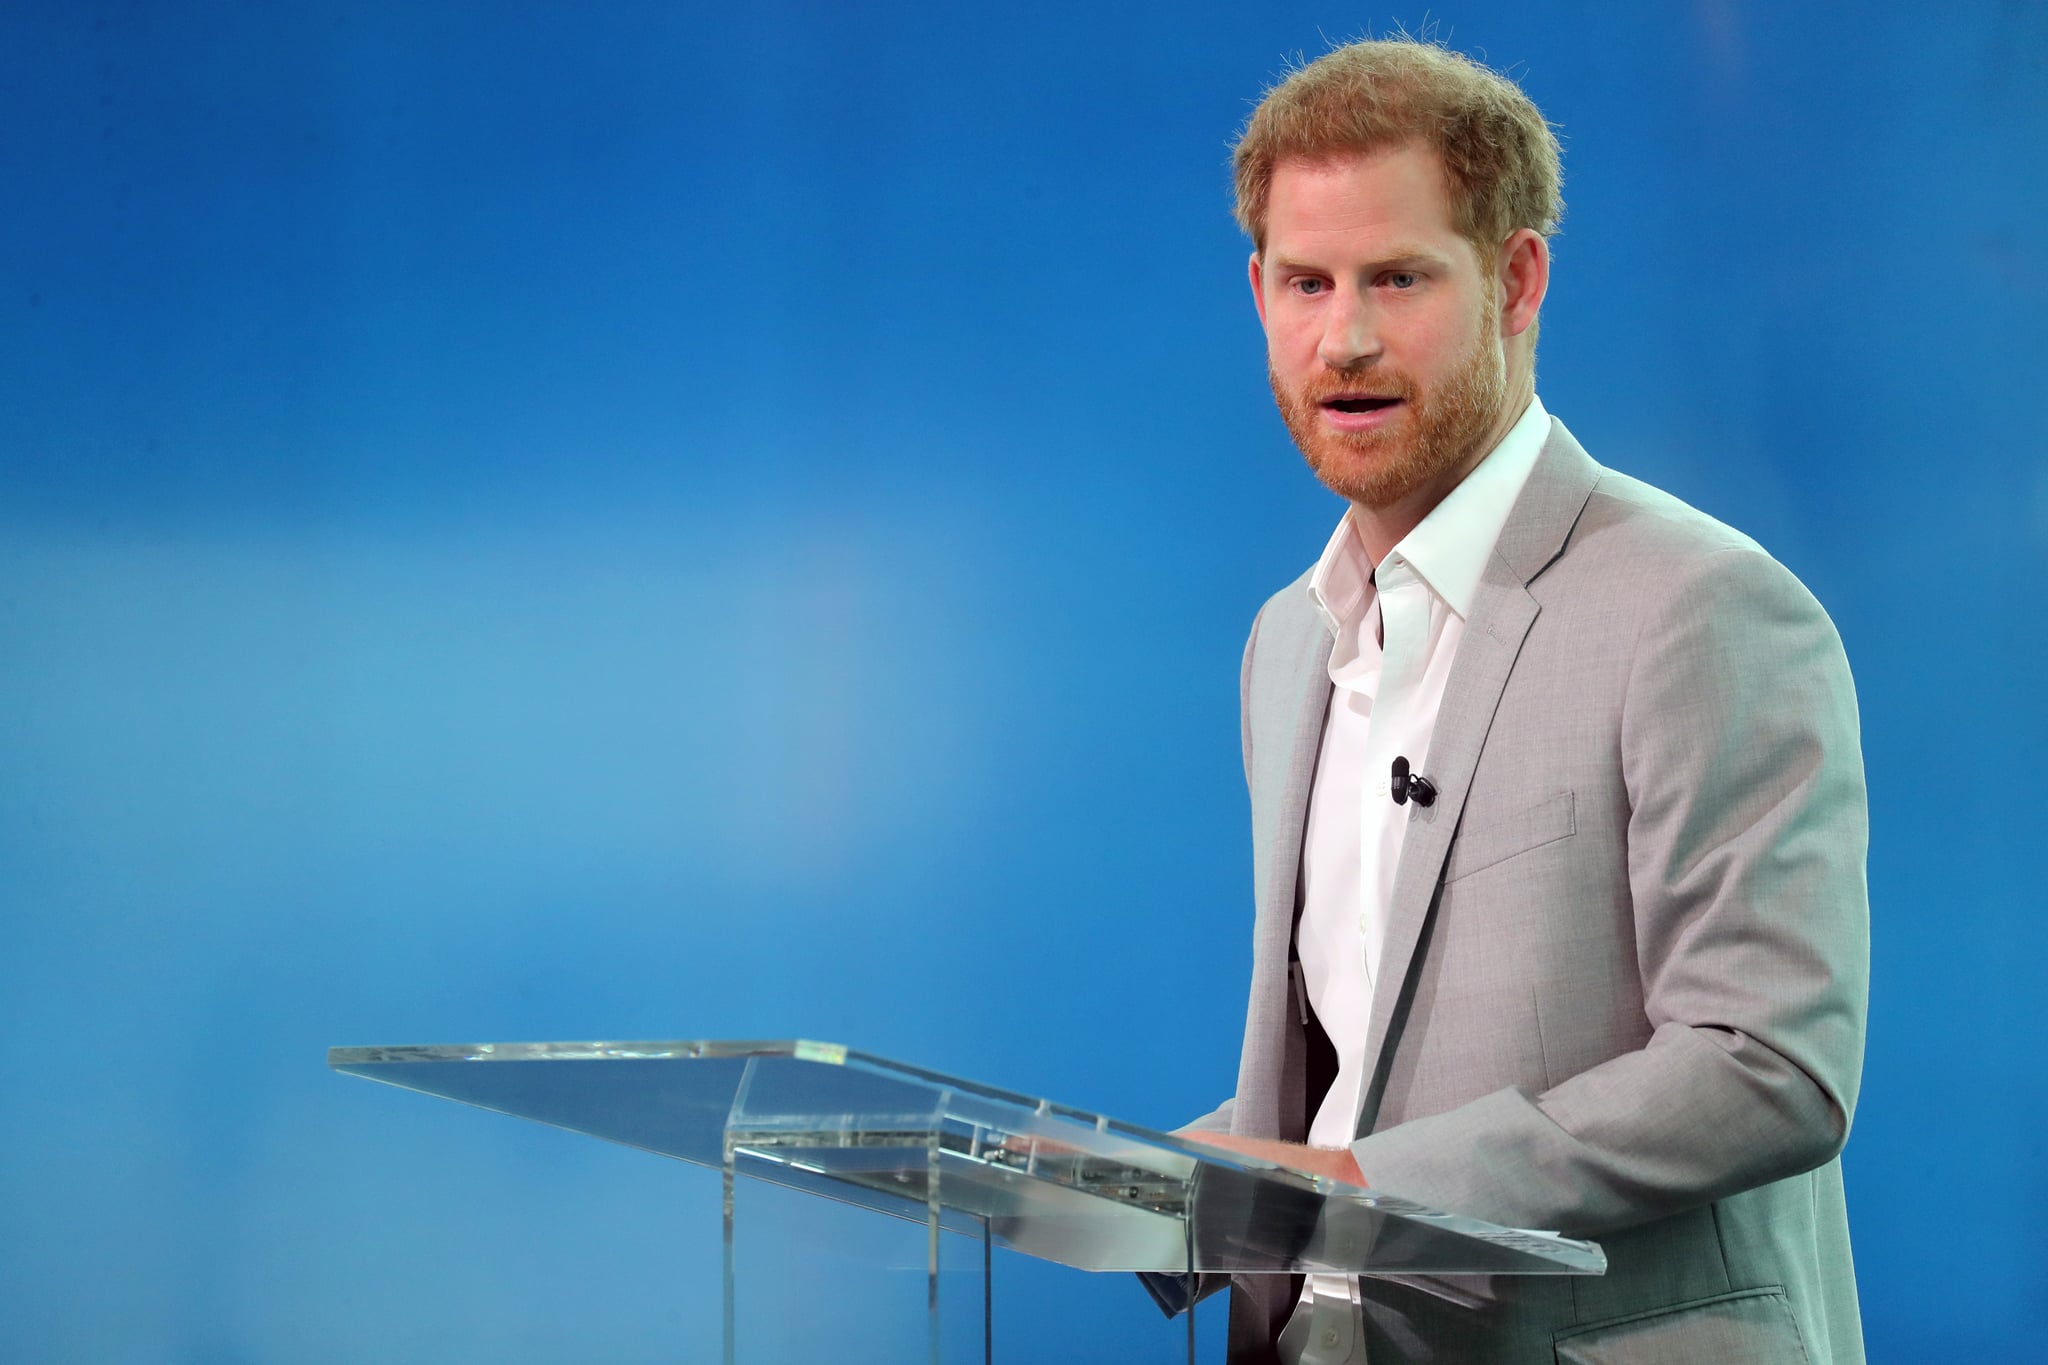 AMSTERDAM, NETHERLANDS - SEPTEMBER 03: Prince Harry, Duke of Sussex announces a partnership between Booking.com, SkyScanner, CTrip, TripAdvisor and Visa called 'Travalyst' at A'dam Tower on September 03, 2019 in Amsterdam, Netherlands. The initiative is to help transform the travel industry to better protect tourist destinations. (Photo by Chris Jackson/Getty Images)